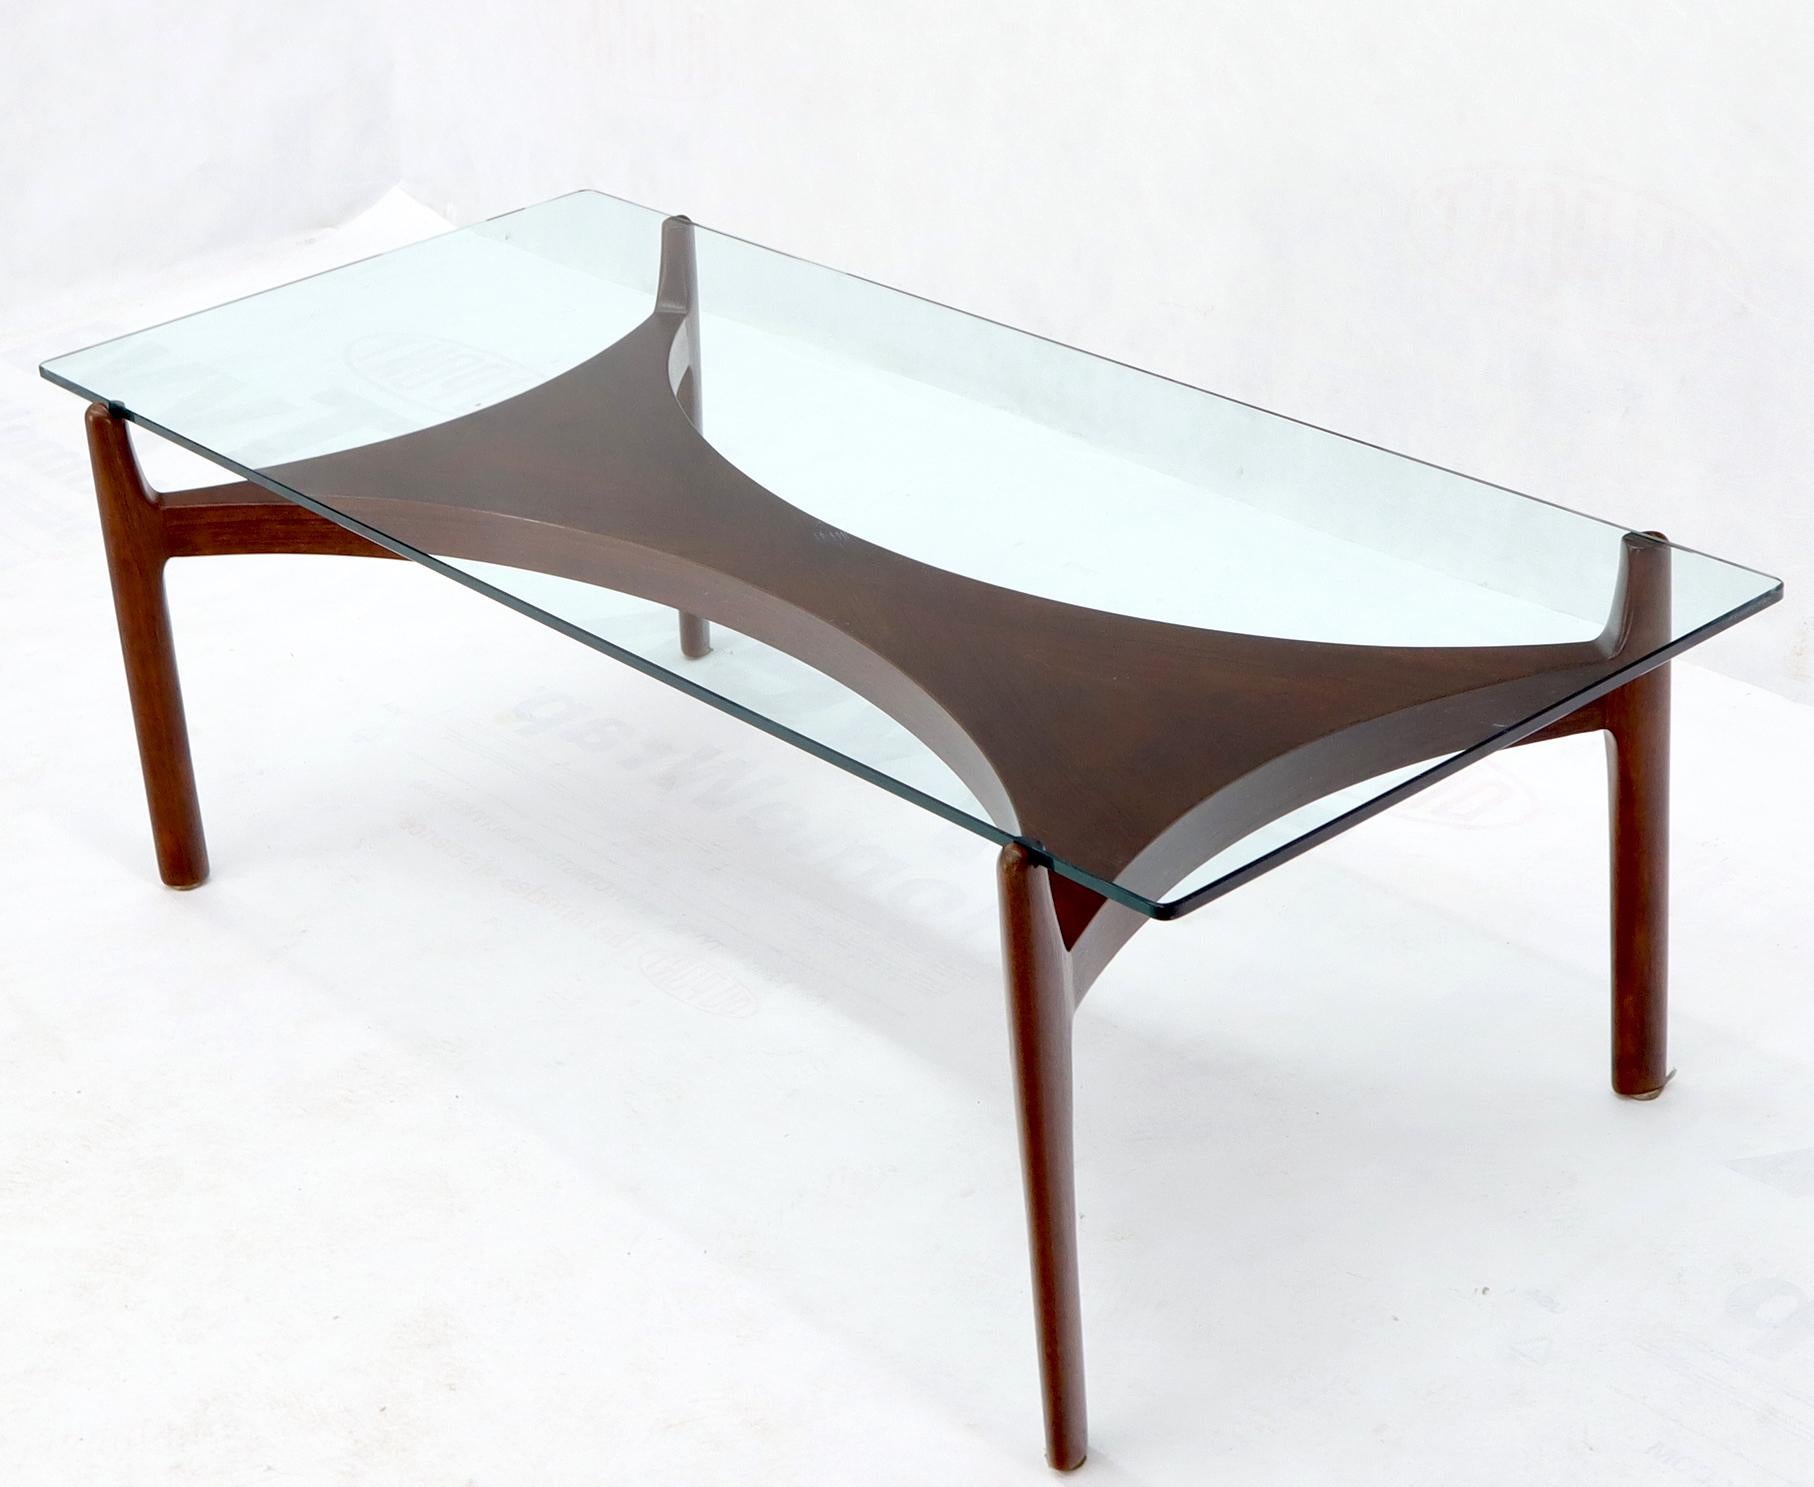 Sculptural Low Profile Teak Base Glass Top Danish Midcentury Coffee Table In Excellent Condition For Sale In Rockaway, NJ